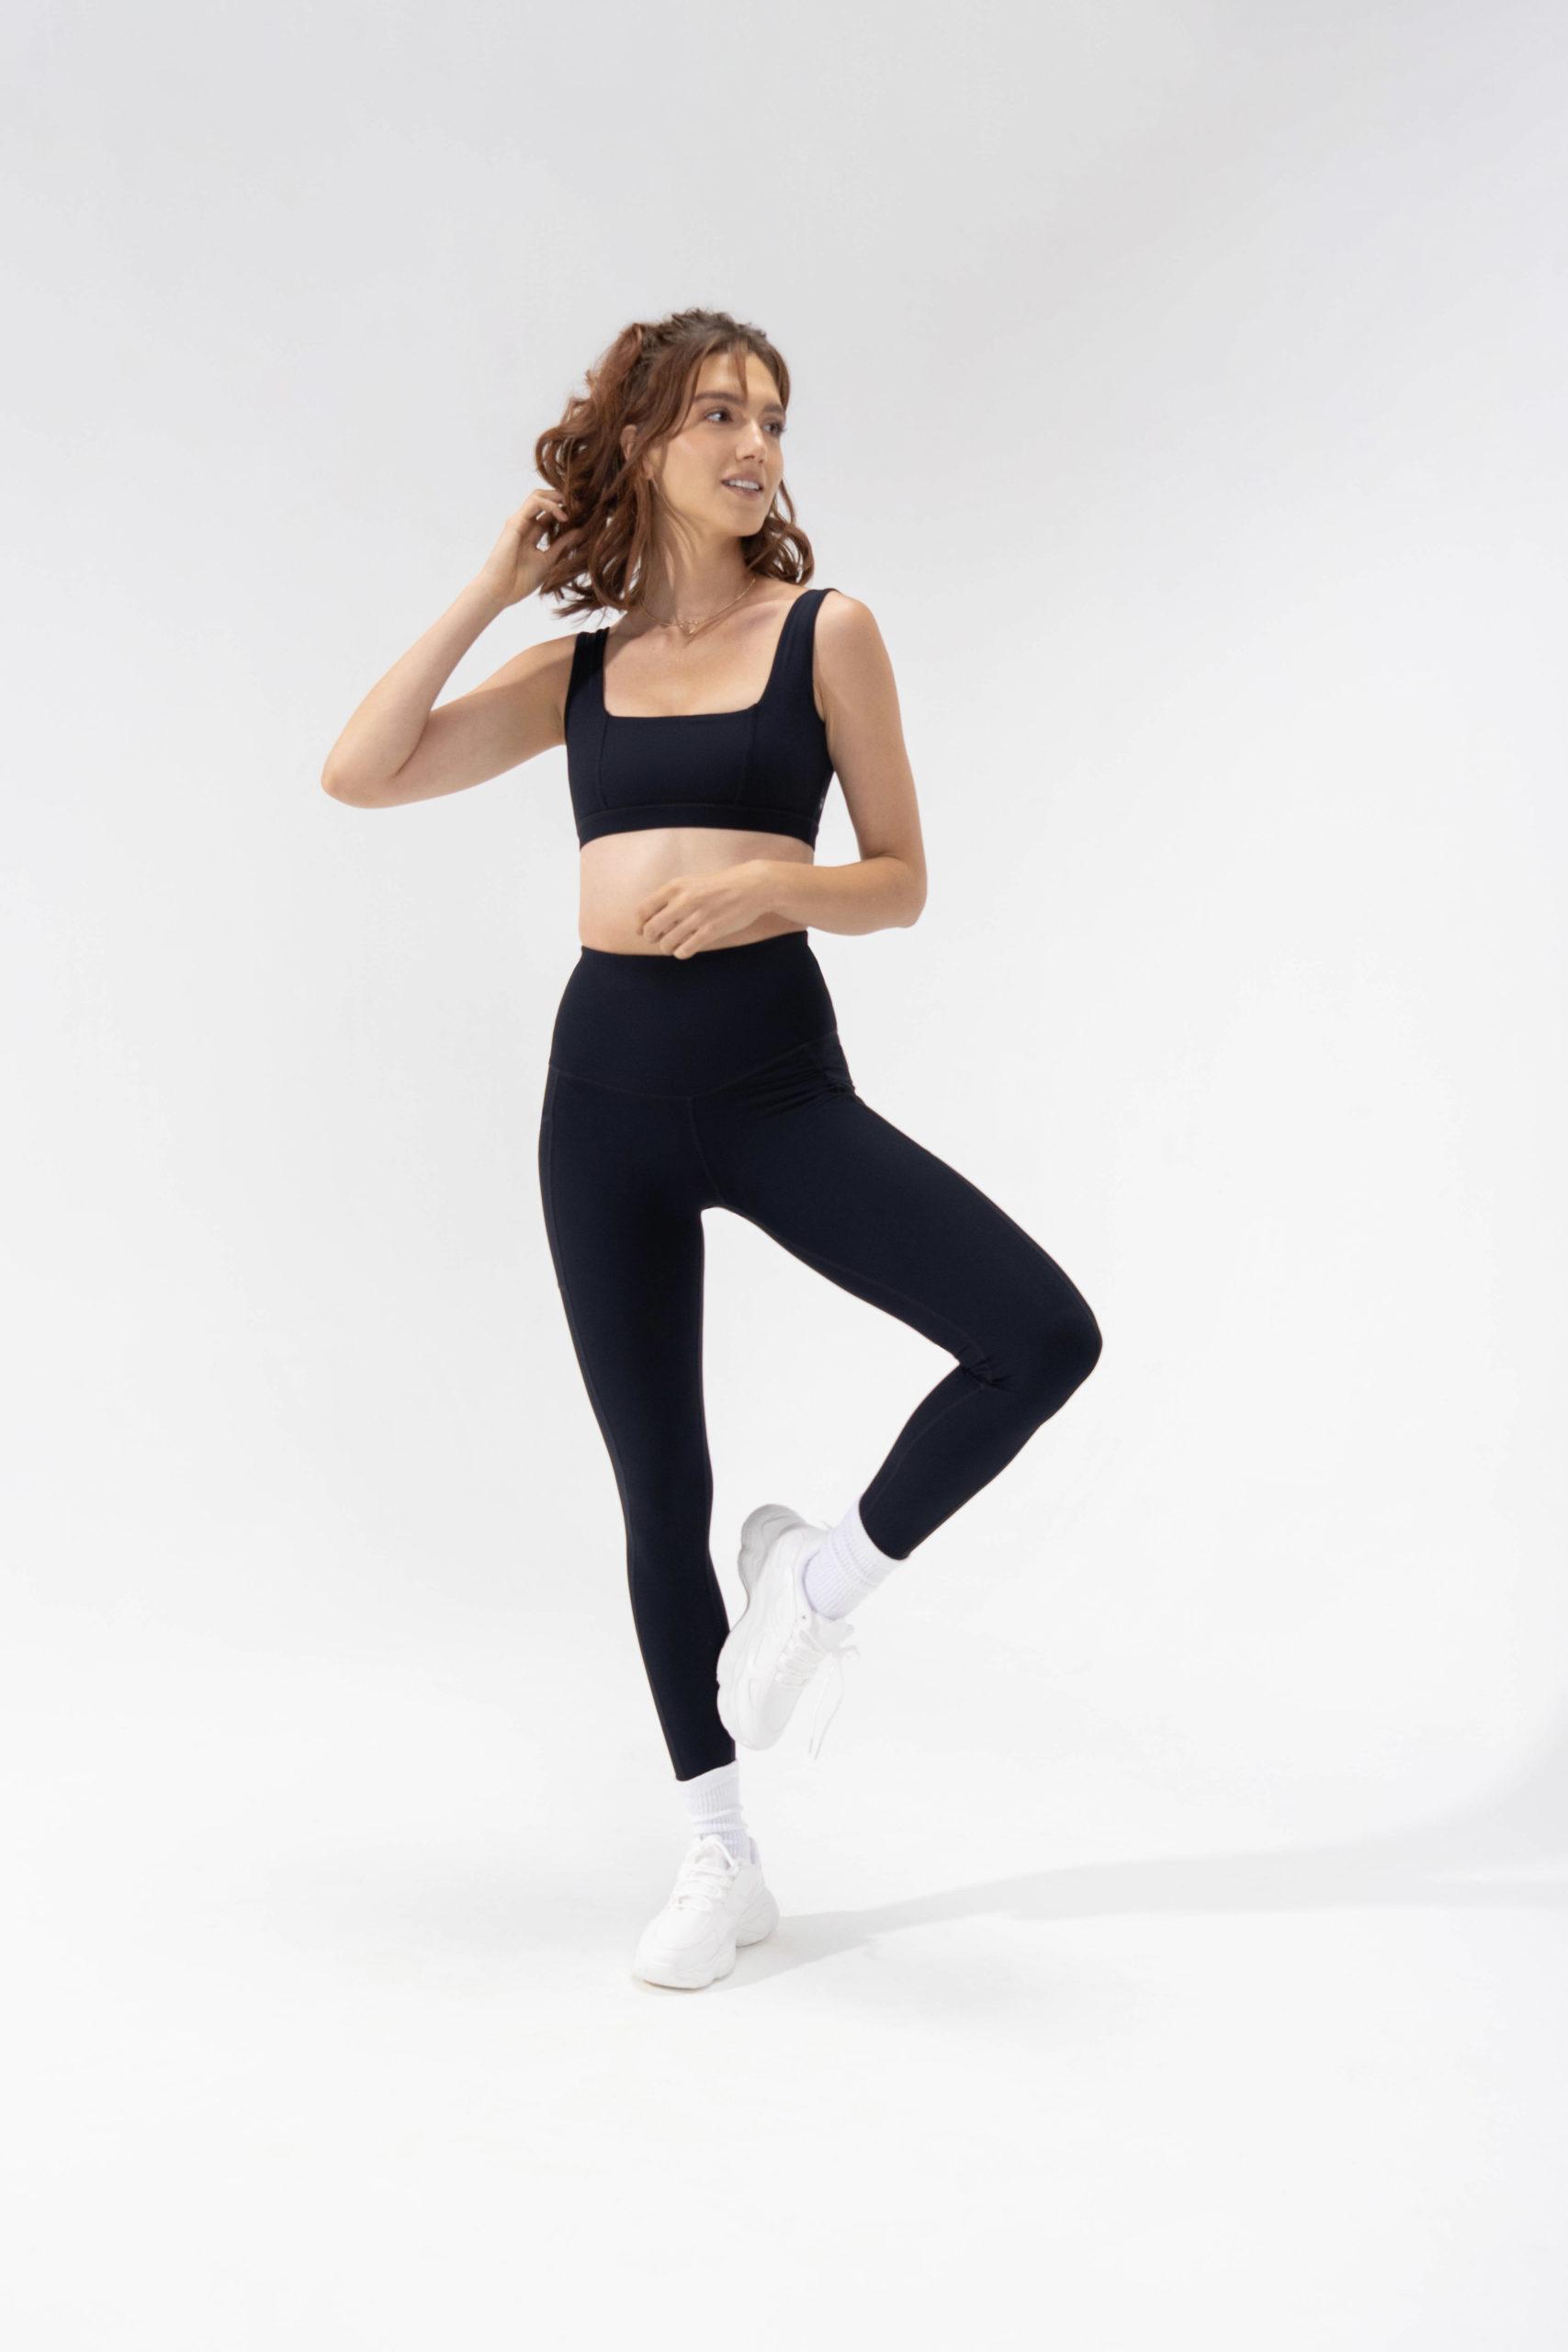 model wearing black timeless tights by popflex active basics